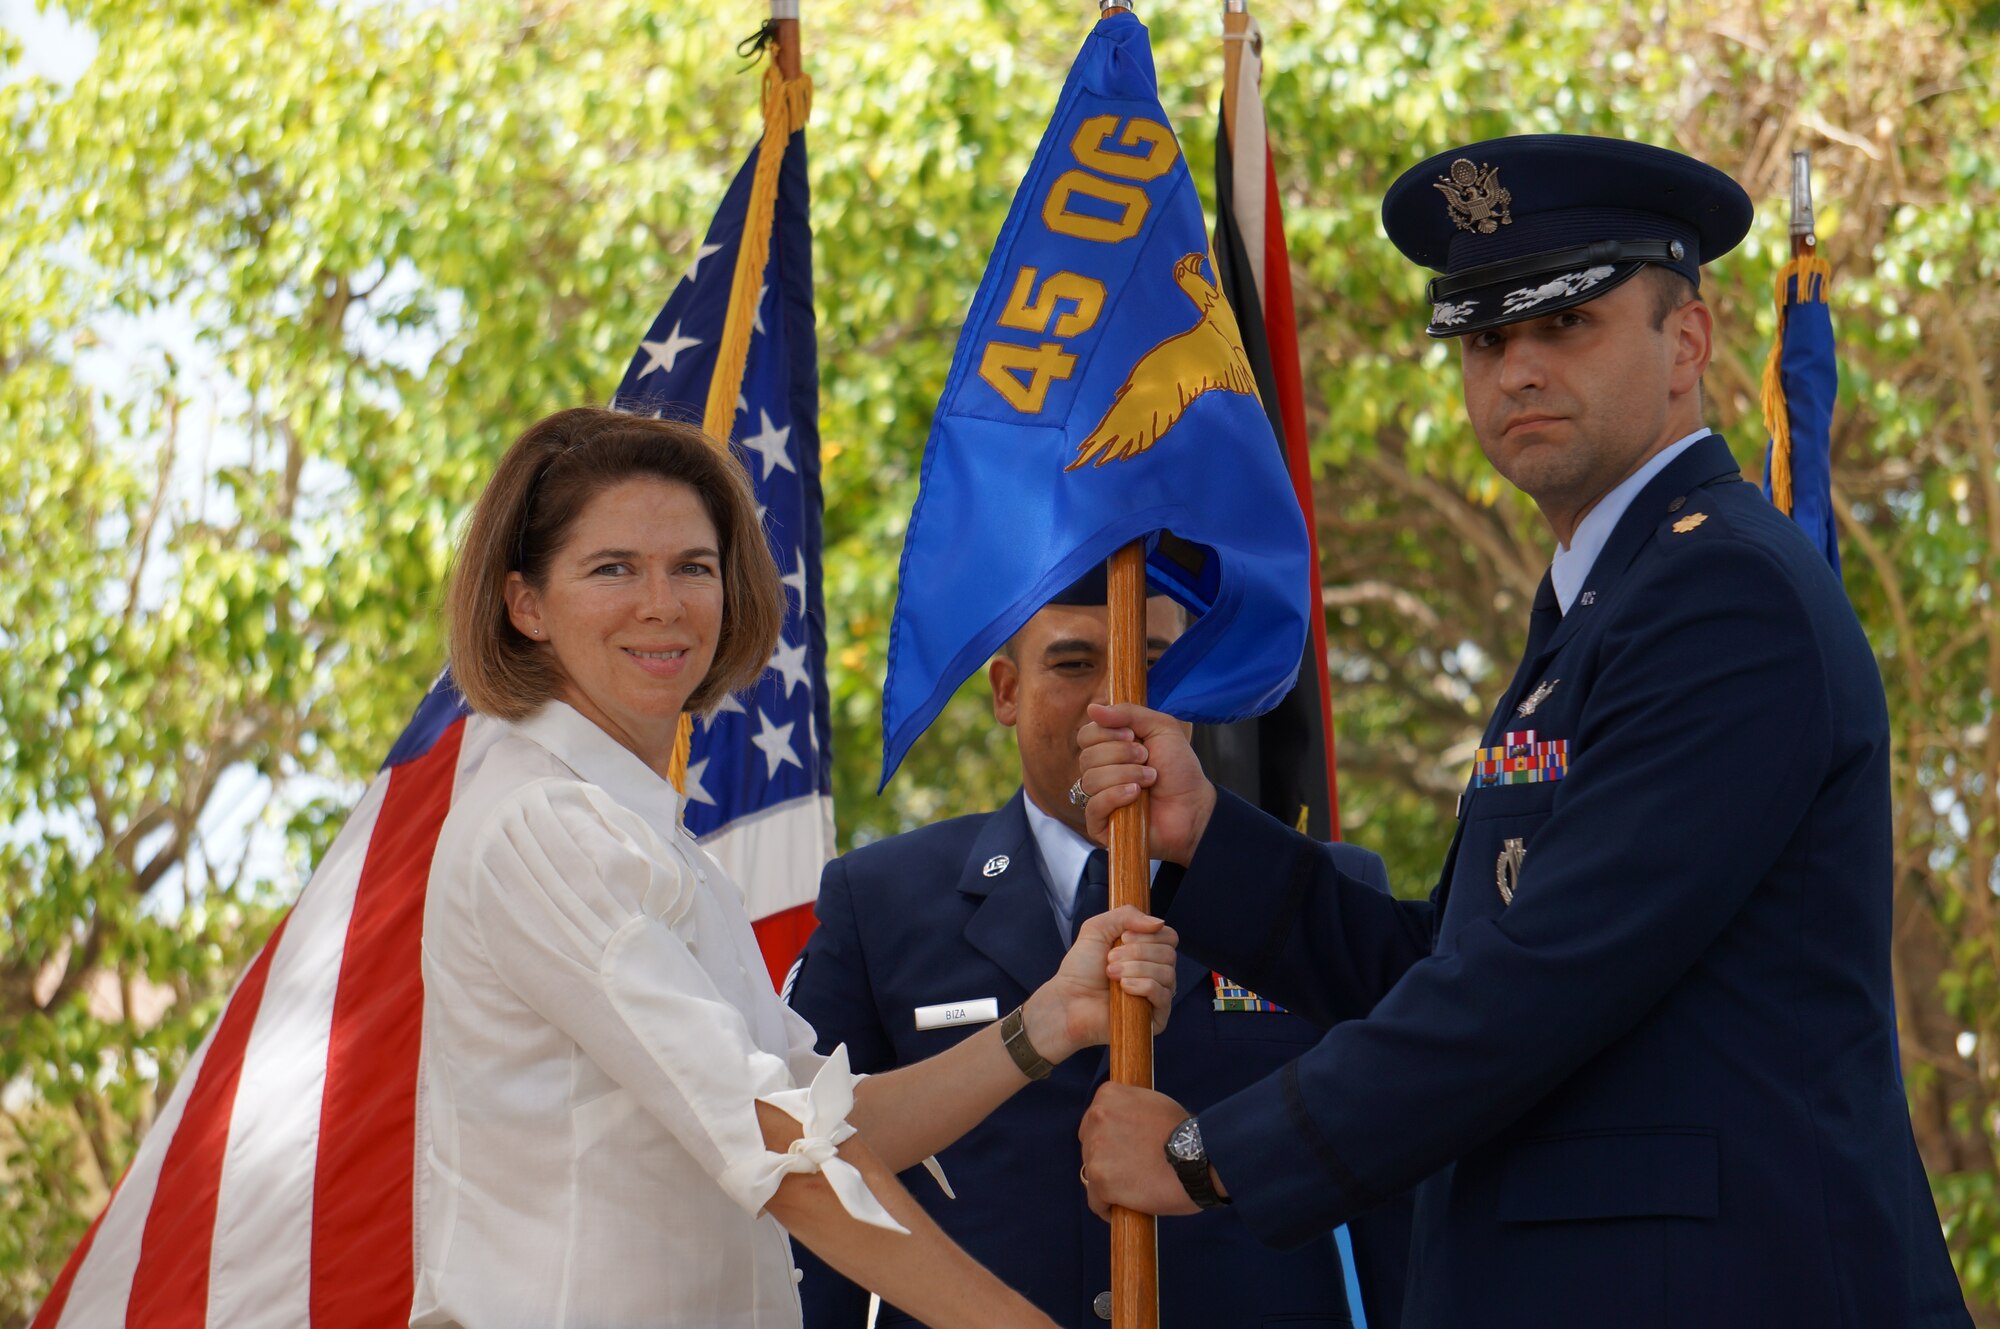 Col. Shannon Klug, 45th Weather Squadron commander and acting Operations Group deputy commander, left, presents Maj. Steven Melvin, 45th Operations Group Detachment 1 commander, with the 45th OG Det. 1 guidon during a change of command ceremony July 7, 2014, at Antigua Air Station, West Indies, Antigua and Barbuda. Changes of command are a military tradition representing the transfer of responsibilities from the presiding officials to the upcoming official. (U.S. Air Force photo/Bruce Wirfs)